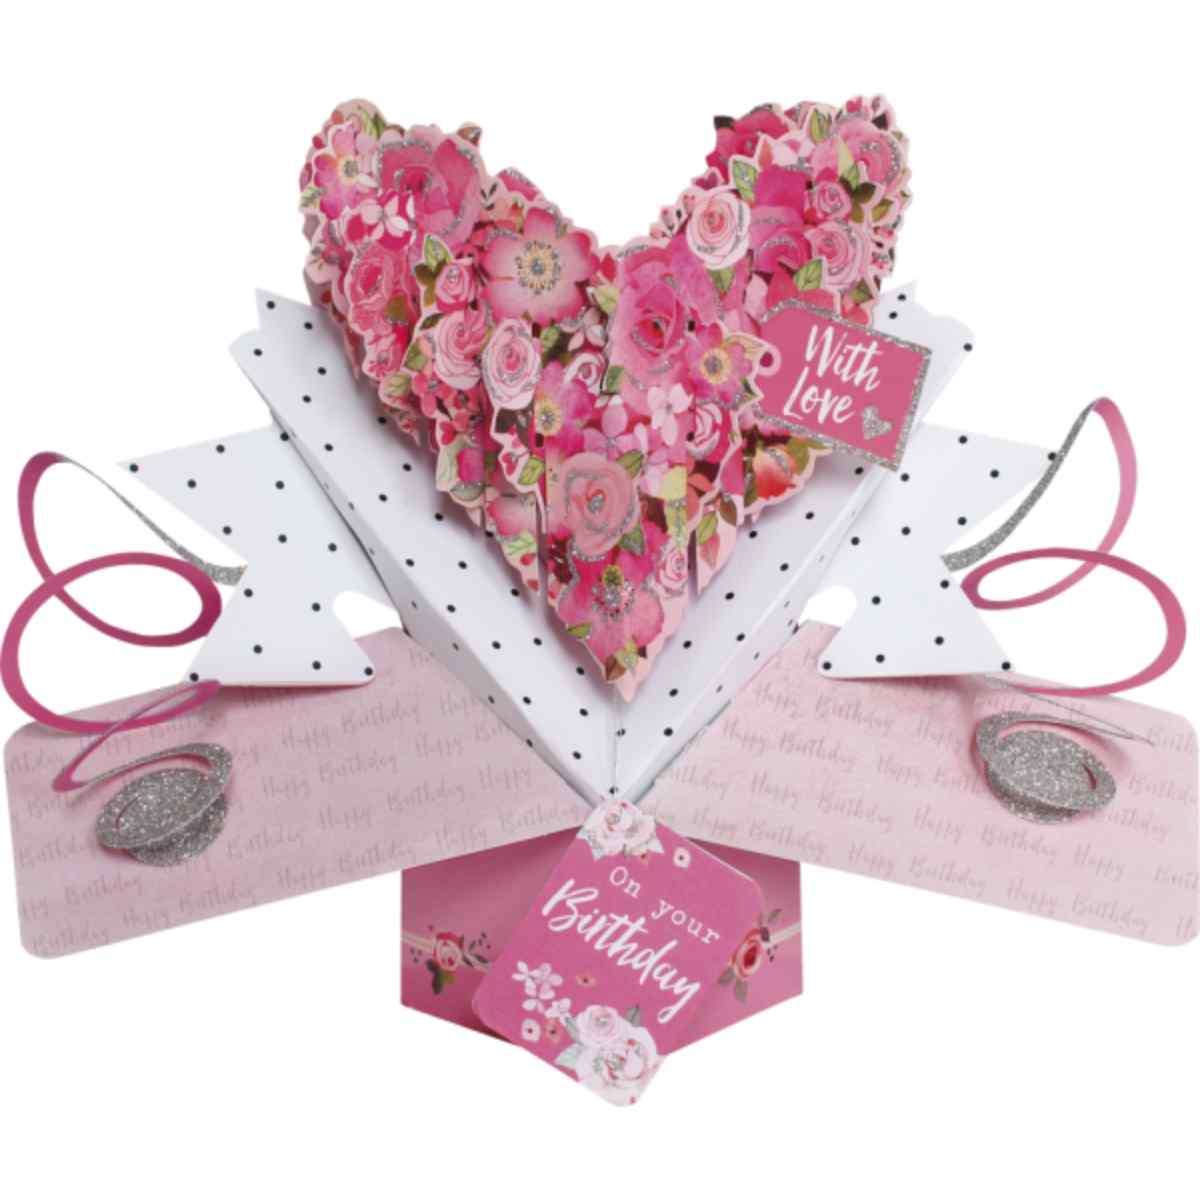 Pop Up Greeting Card - With Love On Your Birthday - Heart Of Flowers